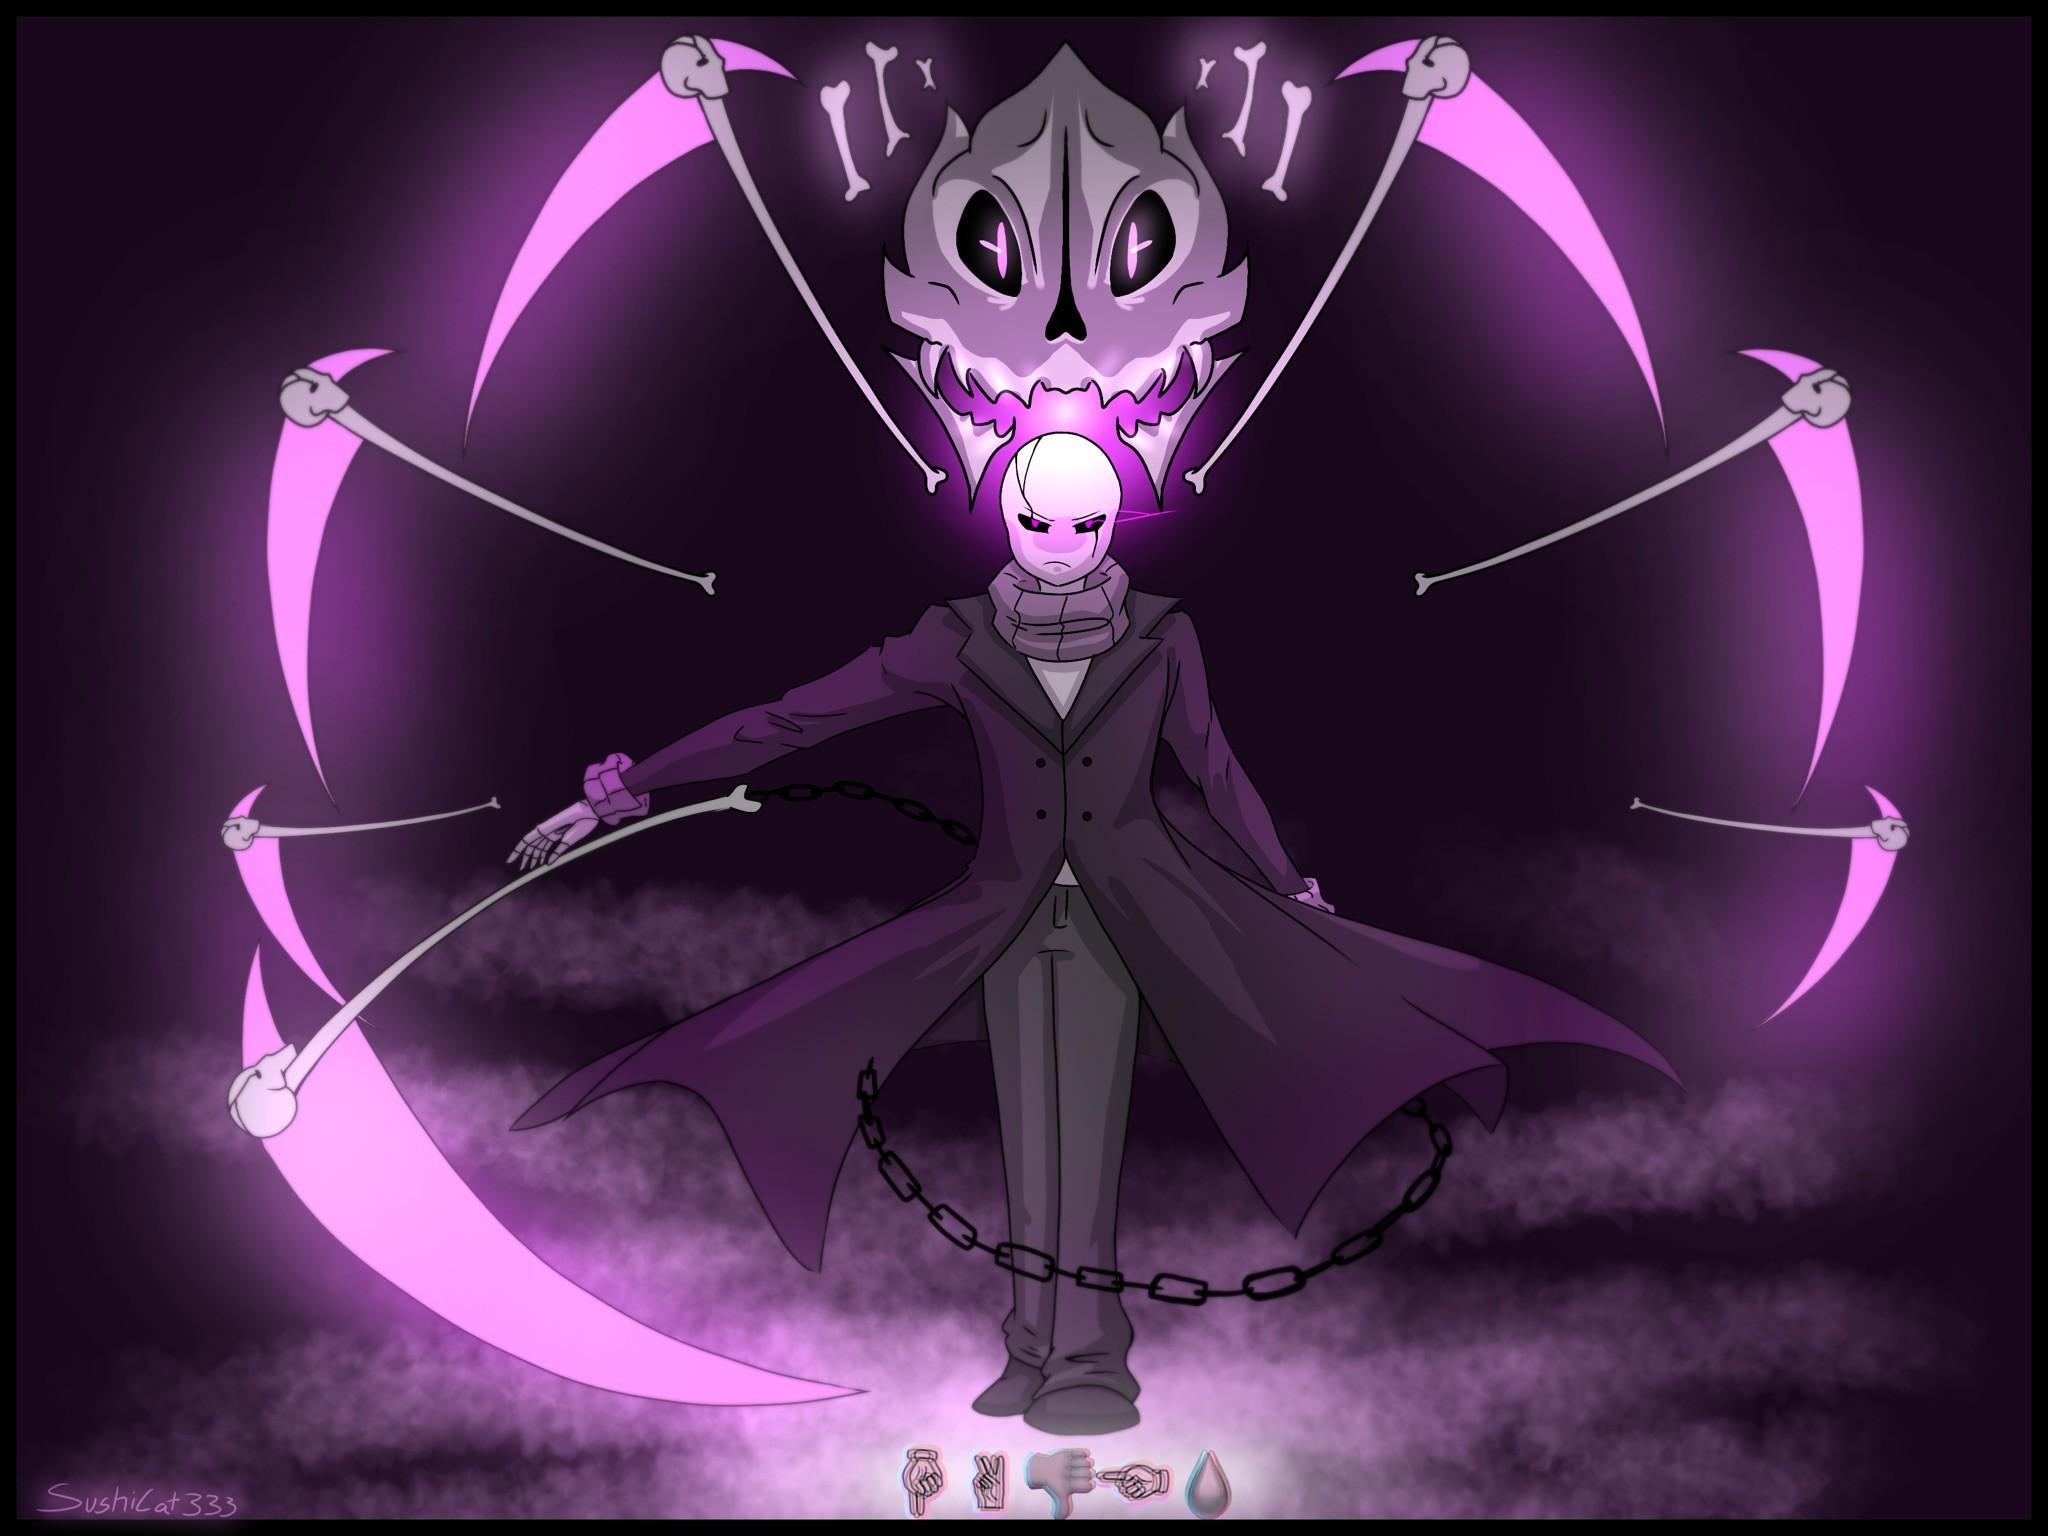 Wallpaperplay Gaster Wallpapers Undertale Mmd Anime.